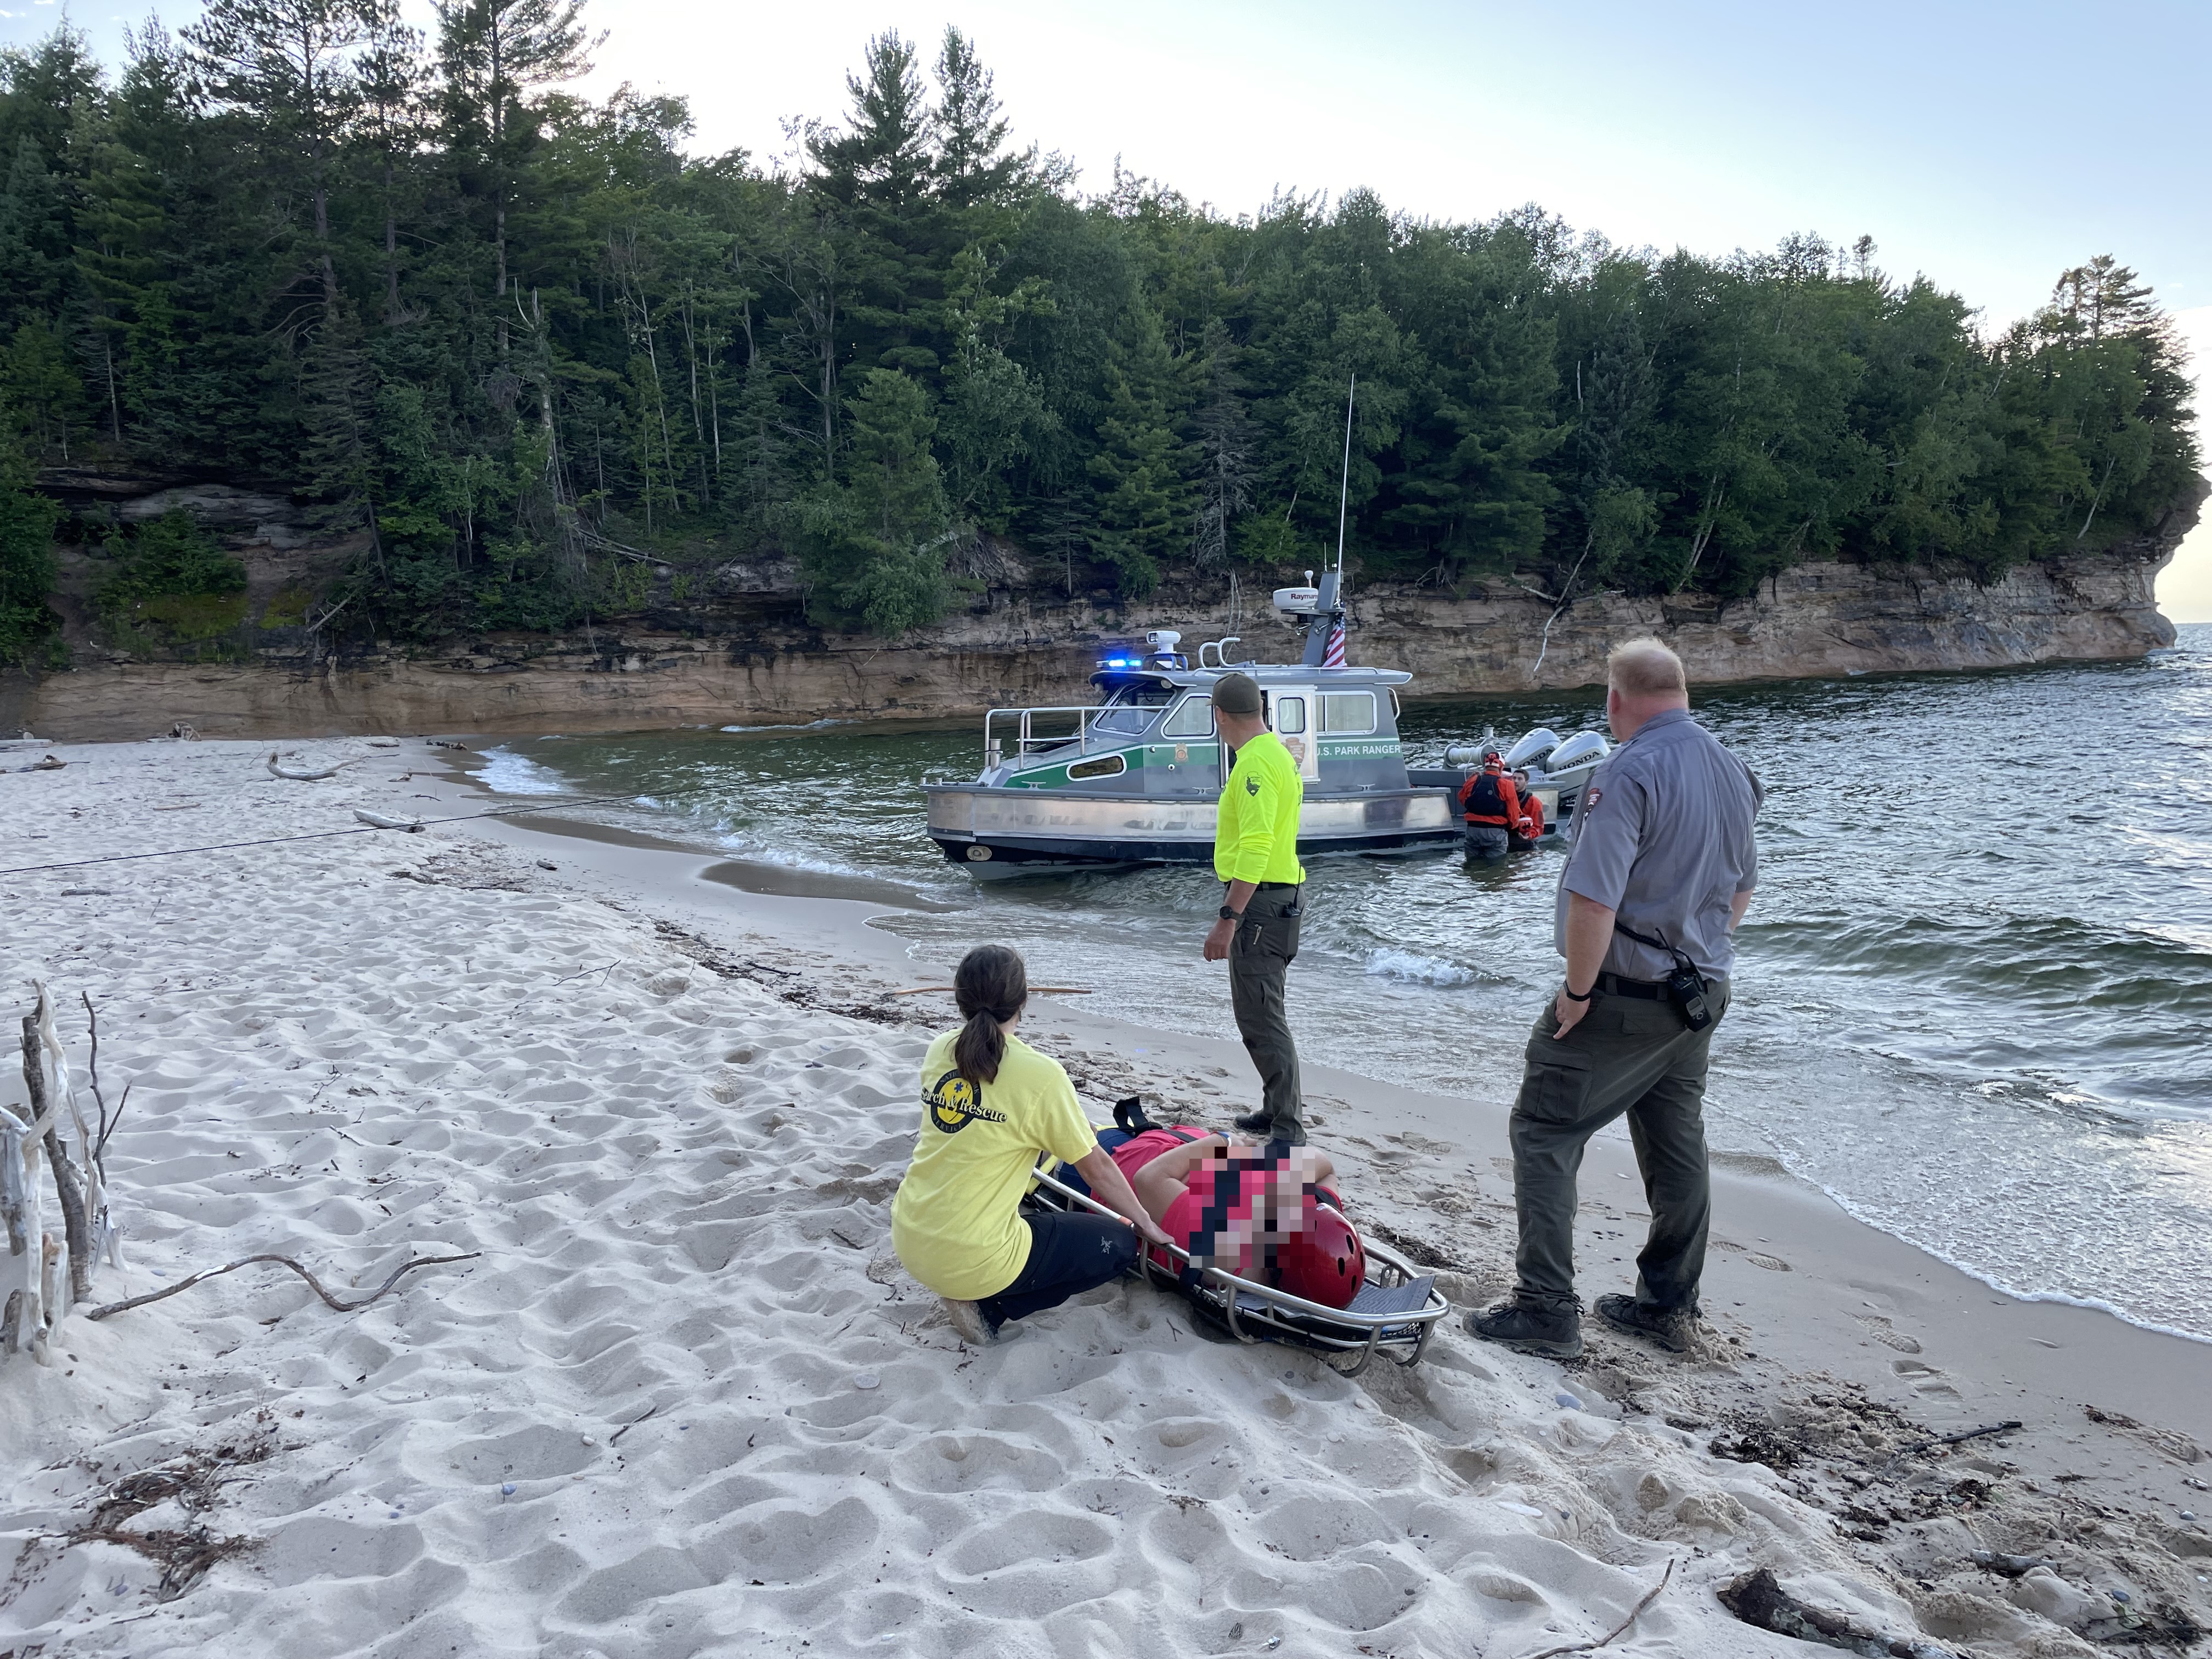 Several people surround a person on a litter on a beach. There is a boat pulled up to the beach.